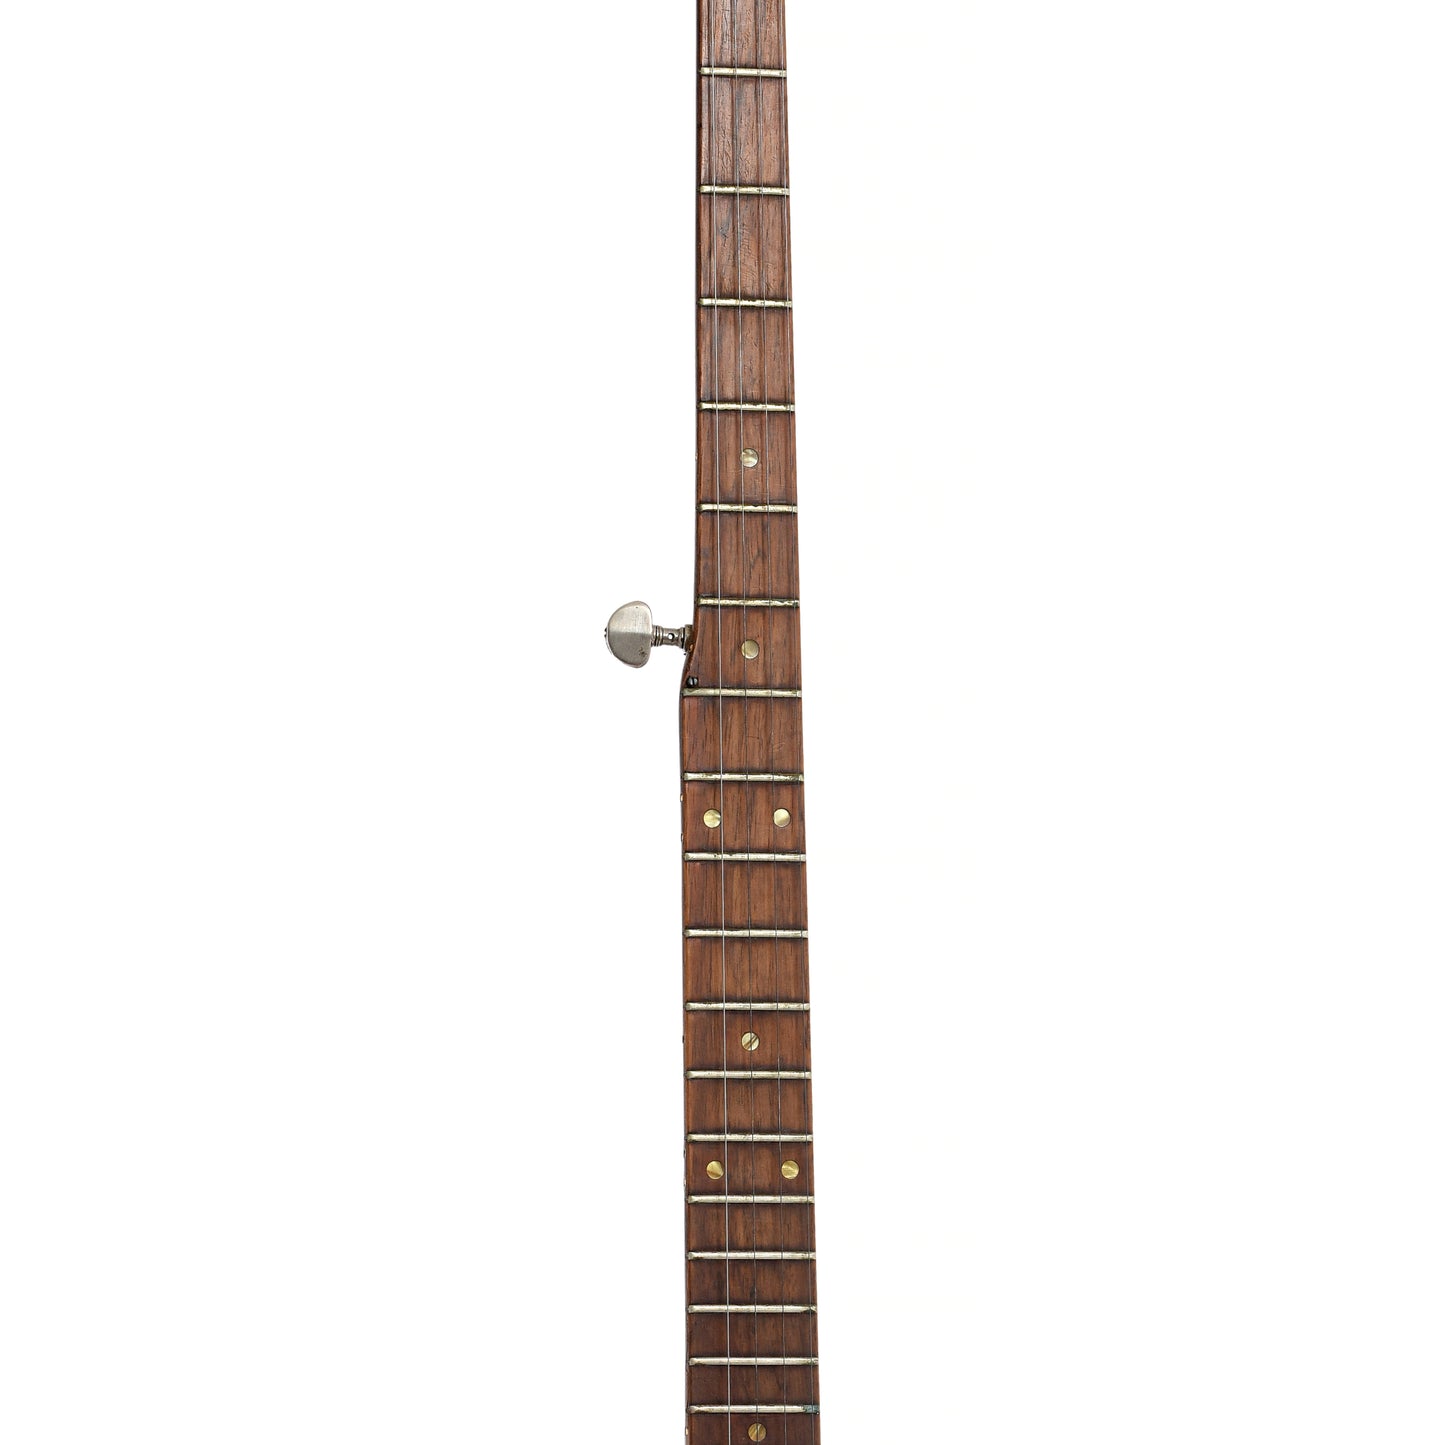 Fretboard of Gibson RB-175 Extra Long Neck Banjo (1966)